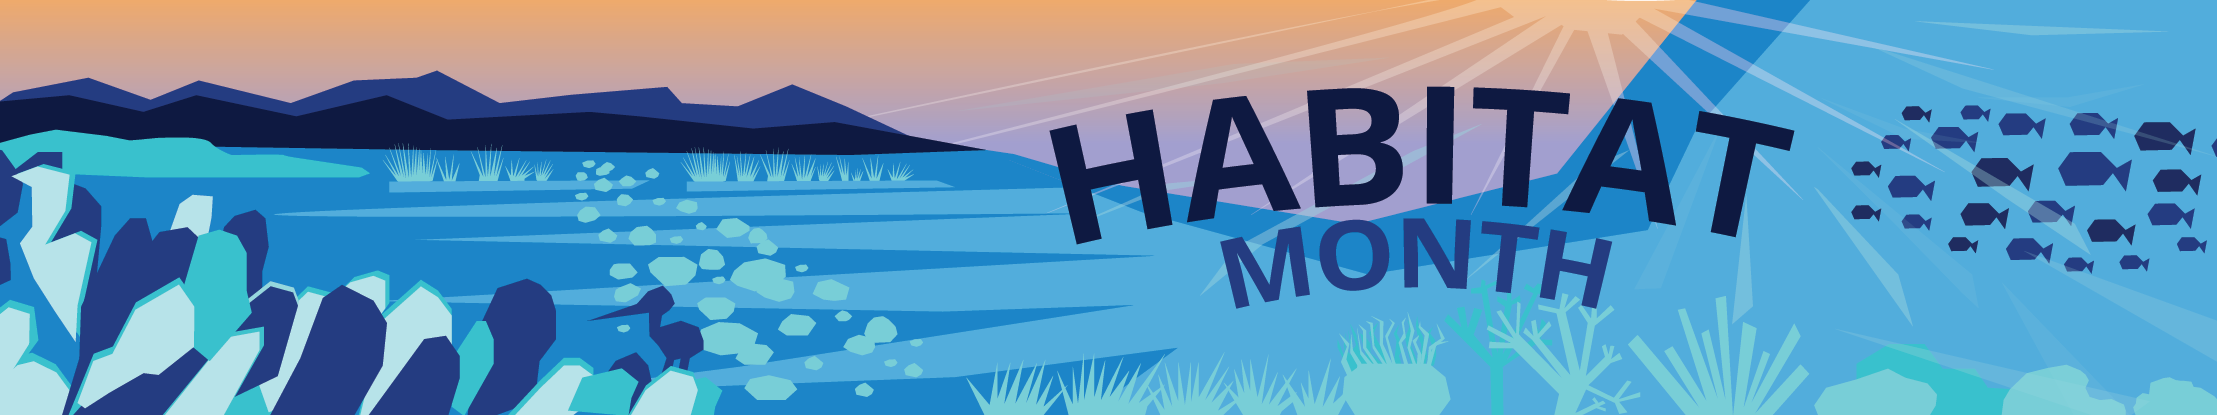 Graphic celebrating Habitat Month with dark blue outlines of sea grass, a school of fish, and a bird